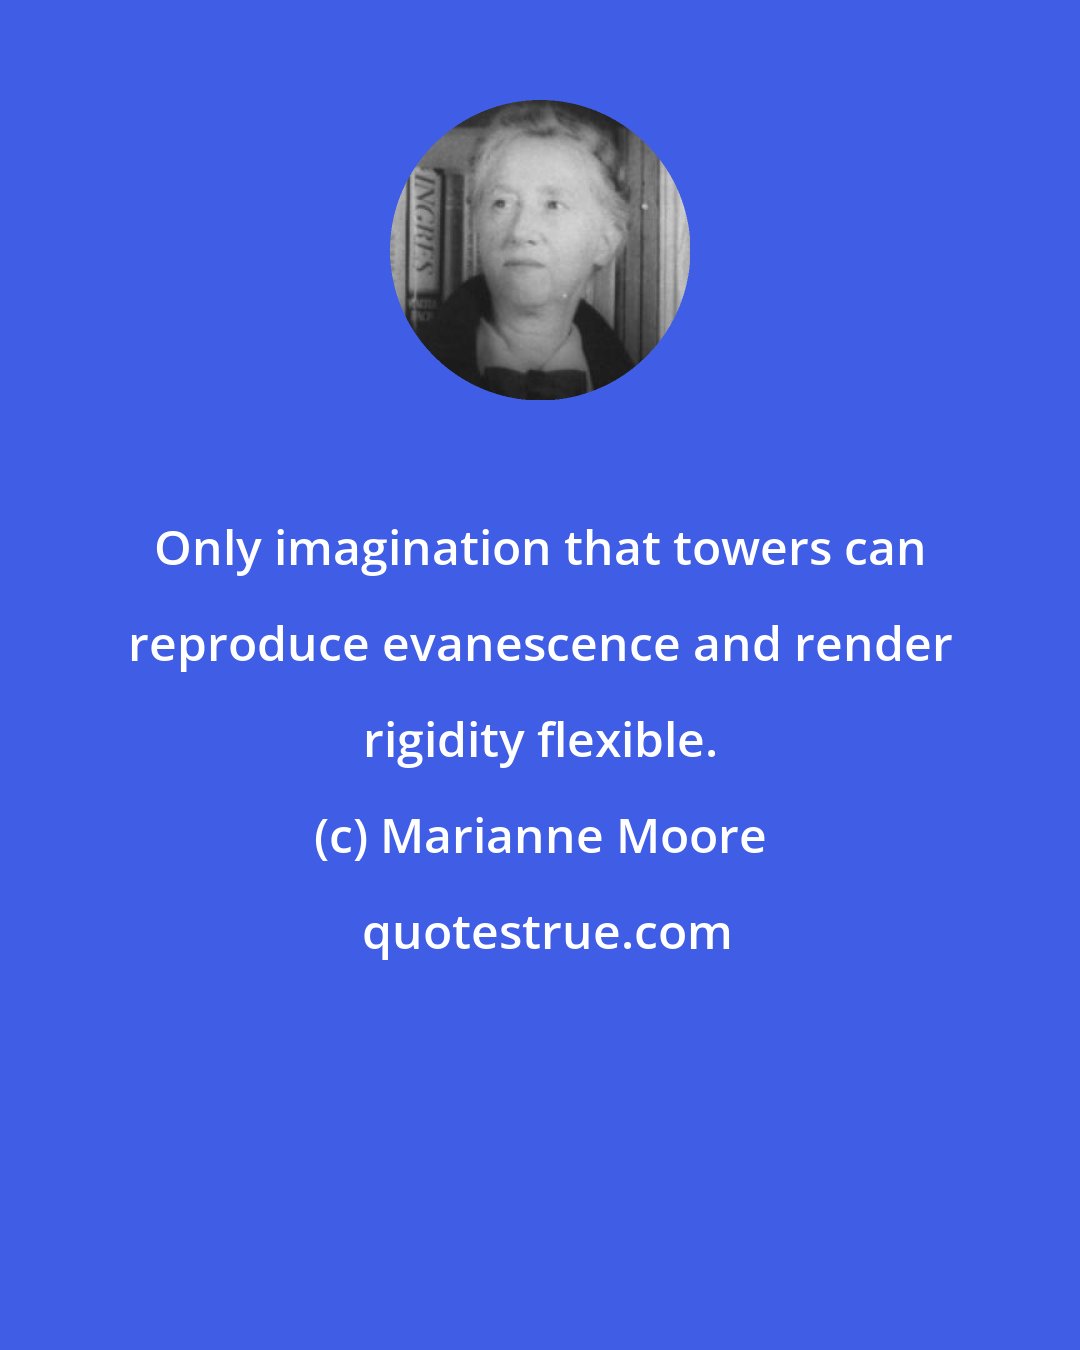 Marianne Moore: Only imagination that towers can reproduce evanescence and render rigidity flexible.